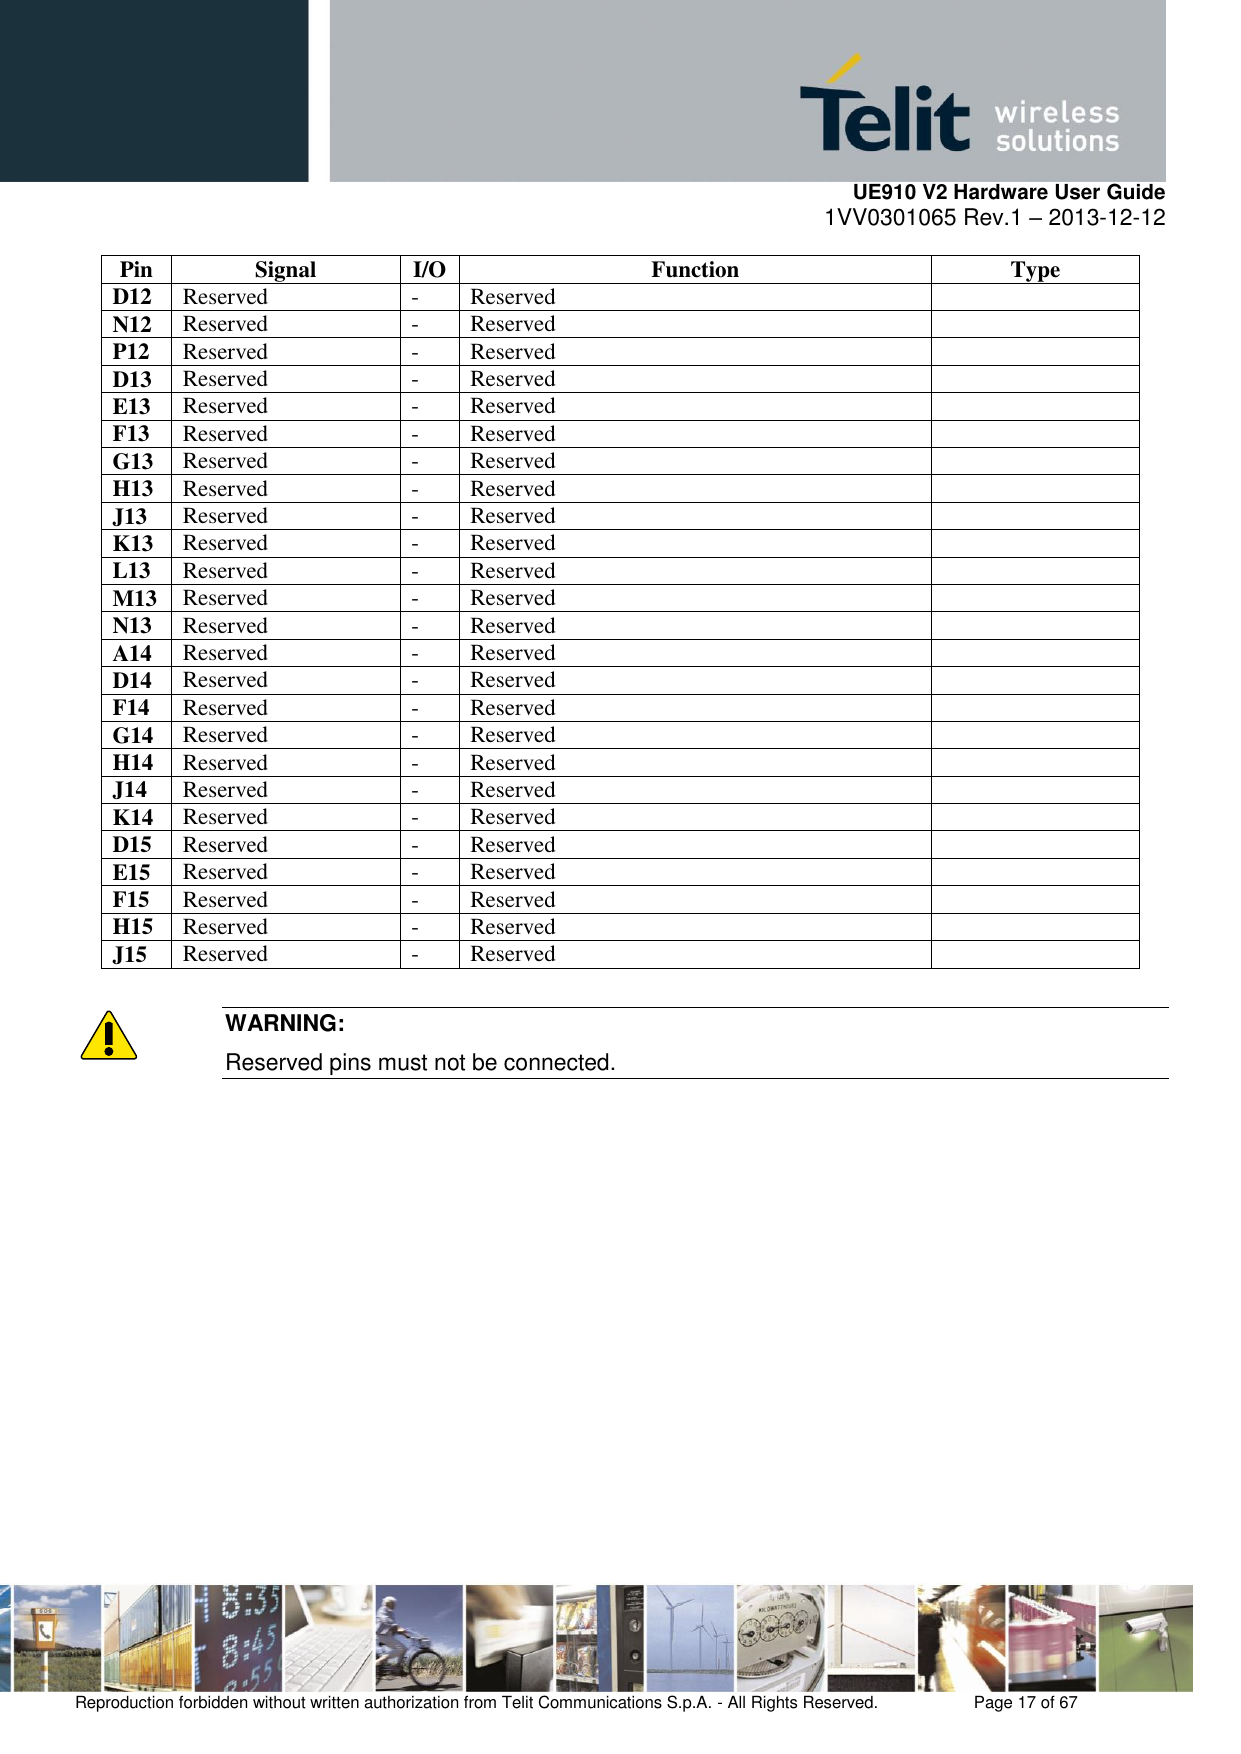     UE910 V2 Hardware User Guide 1VV0301065 Rev.1 – 2013-12-12  Reproduction forbidden without written authorization from Telit Communications S.p.A. - All Rights Reserved.    Page 17 of 67                                                     Pin Signal I/O Function Type D12 Reserved - Reserved  N12 Reserved - Reserved  P12 Reserved - Reserved  D13 Reserved - Reserved  E13 Reserved - Reserved  F13 Reserved - Reserved  G13 Reserved - Reserved  H13 Reserved - Reserved  J13 Reserved - Reserved  K13 Reserved - Reserved  L13 Reserved - Reserved  M13 Reserved - Reserved  N13 Reserved - Reserved  A14 Reserved - Reserved  D14 Reserved - Reserved  F14 Reserved - Reserved  G14 Reserved - Reserved  H14 Reserved - Reserved  J14 Reserved - Reserved  K14 Reserved - Reserved  D15 Reserved - Reserved  E15 Reserved - Reserved  F15 Reserved - Reserved  H15 Reserved - Reserved  J15 Reserved - Reserved   WARNING: Reserved pins must not be connected.                 